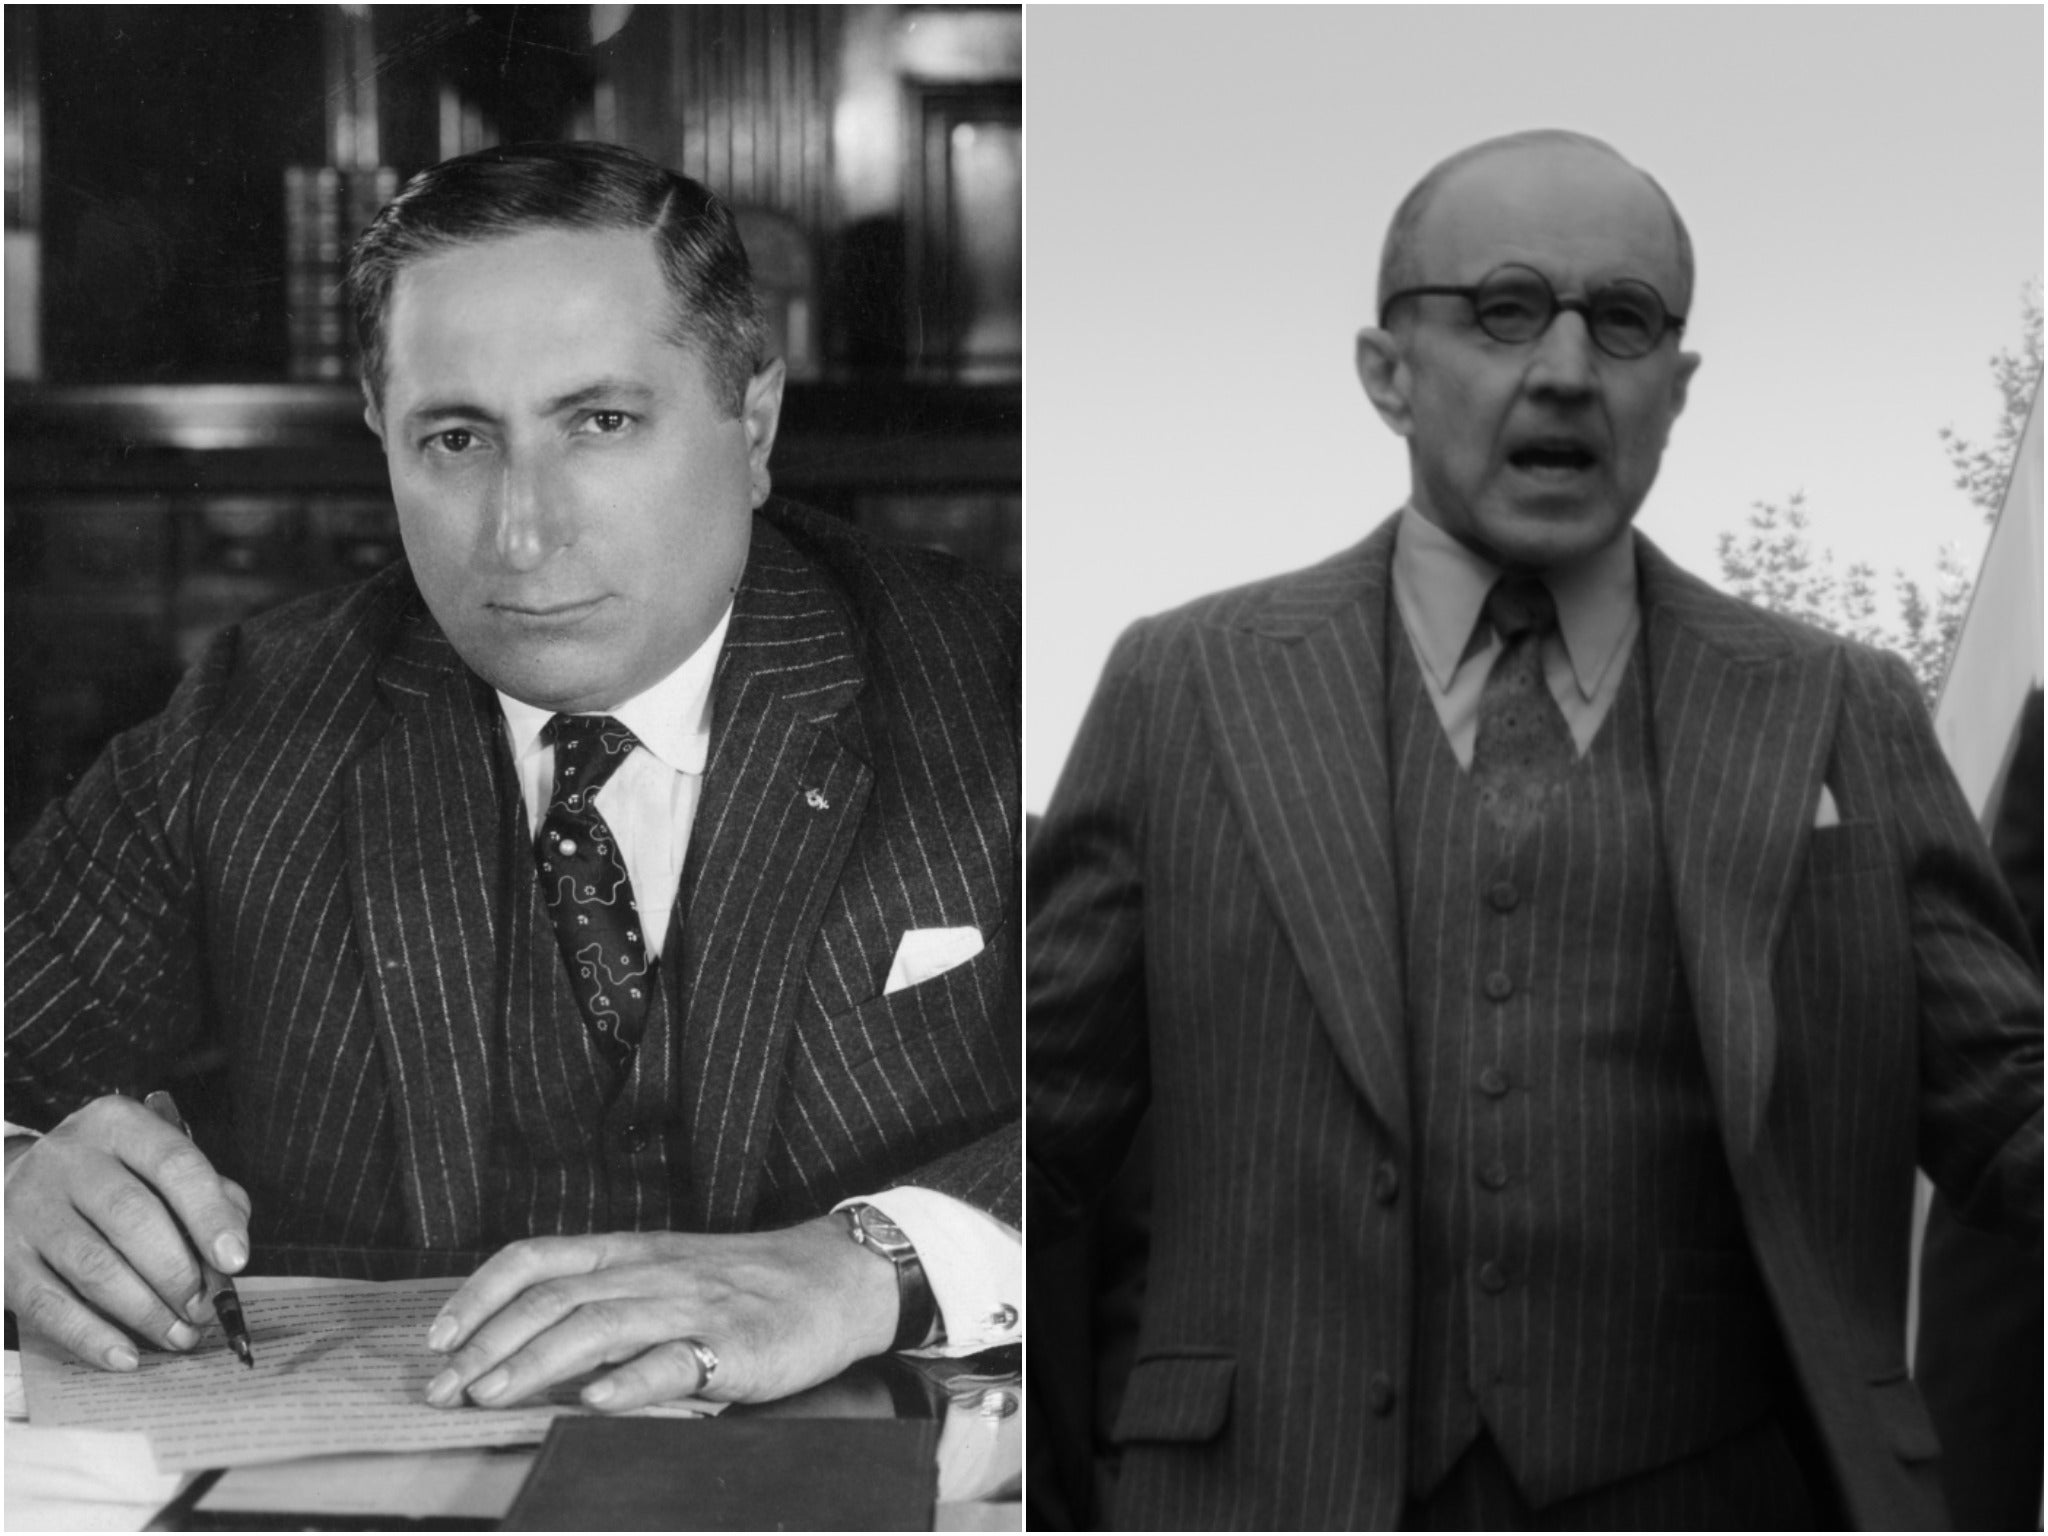 Louis B Mayer (left) and as portrayed by Arliss Howard in Mank (right)